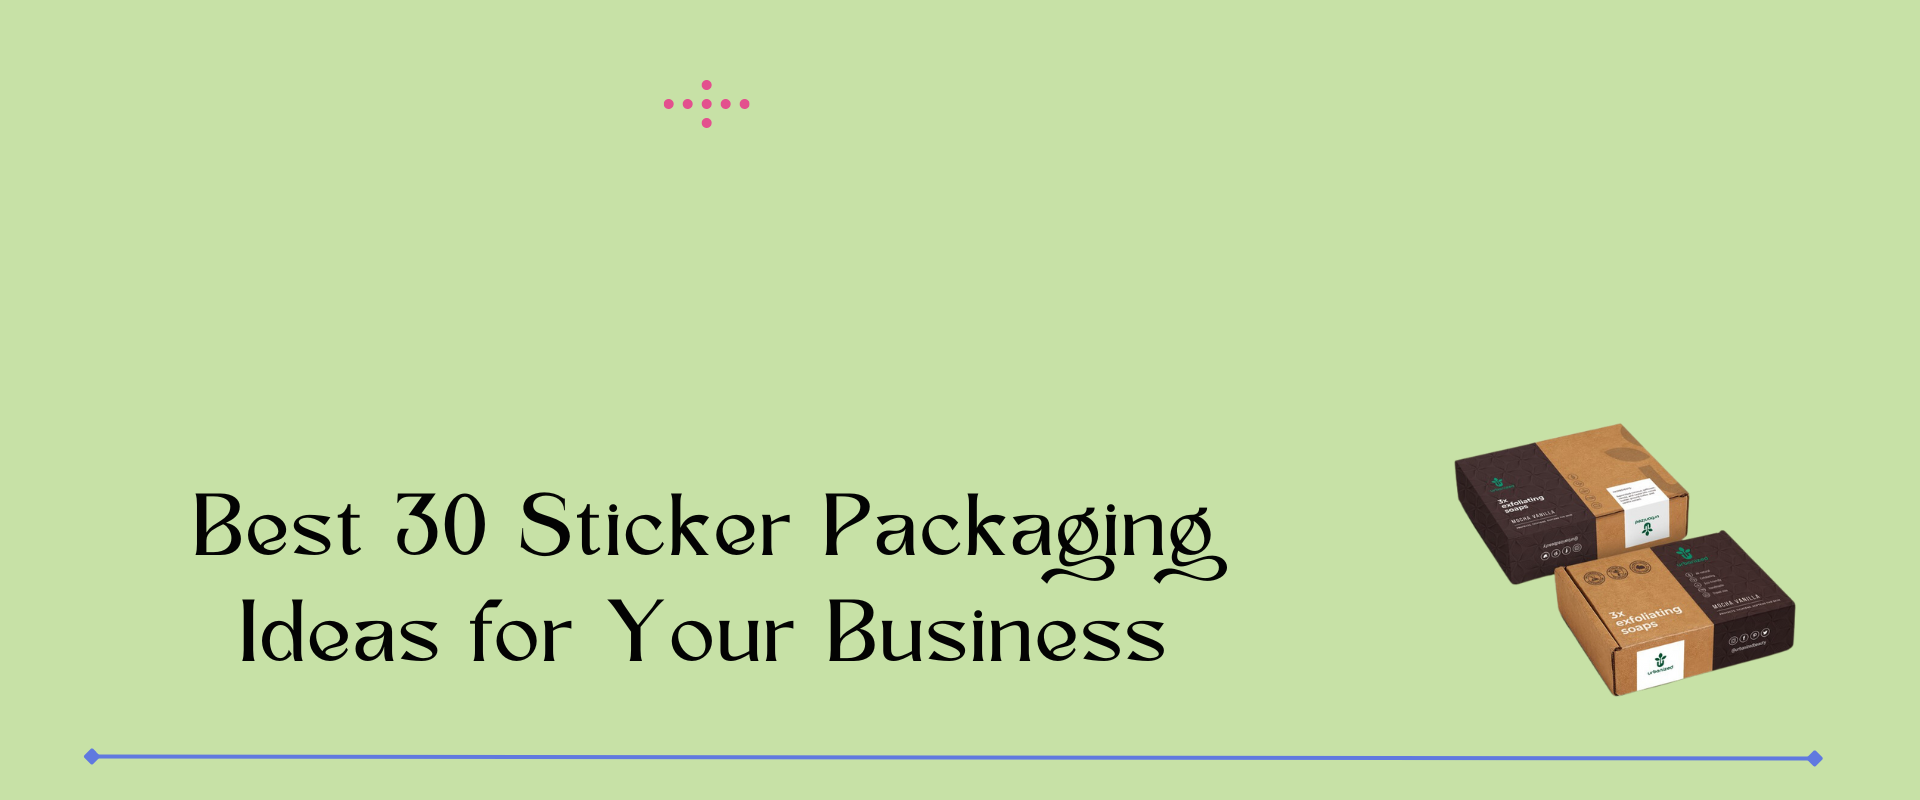 Best 30 Sticker Packaging Ideas for Your Business